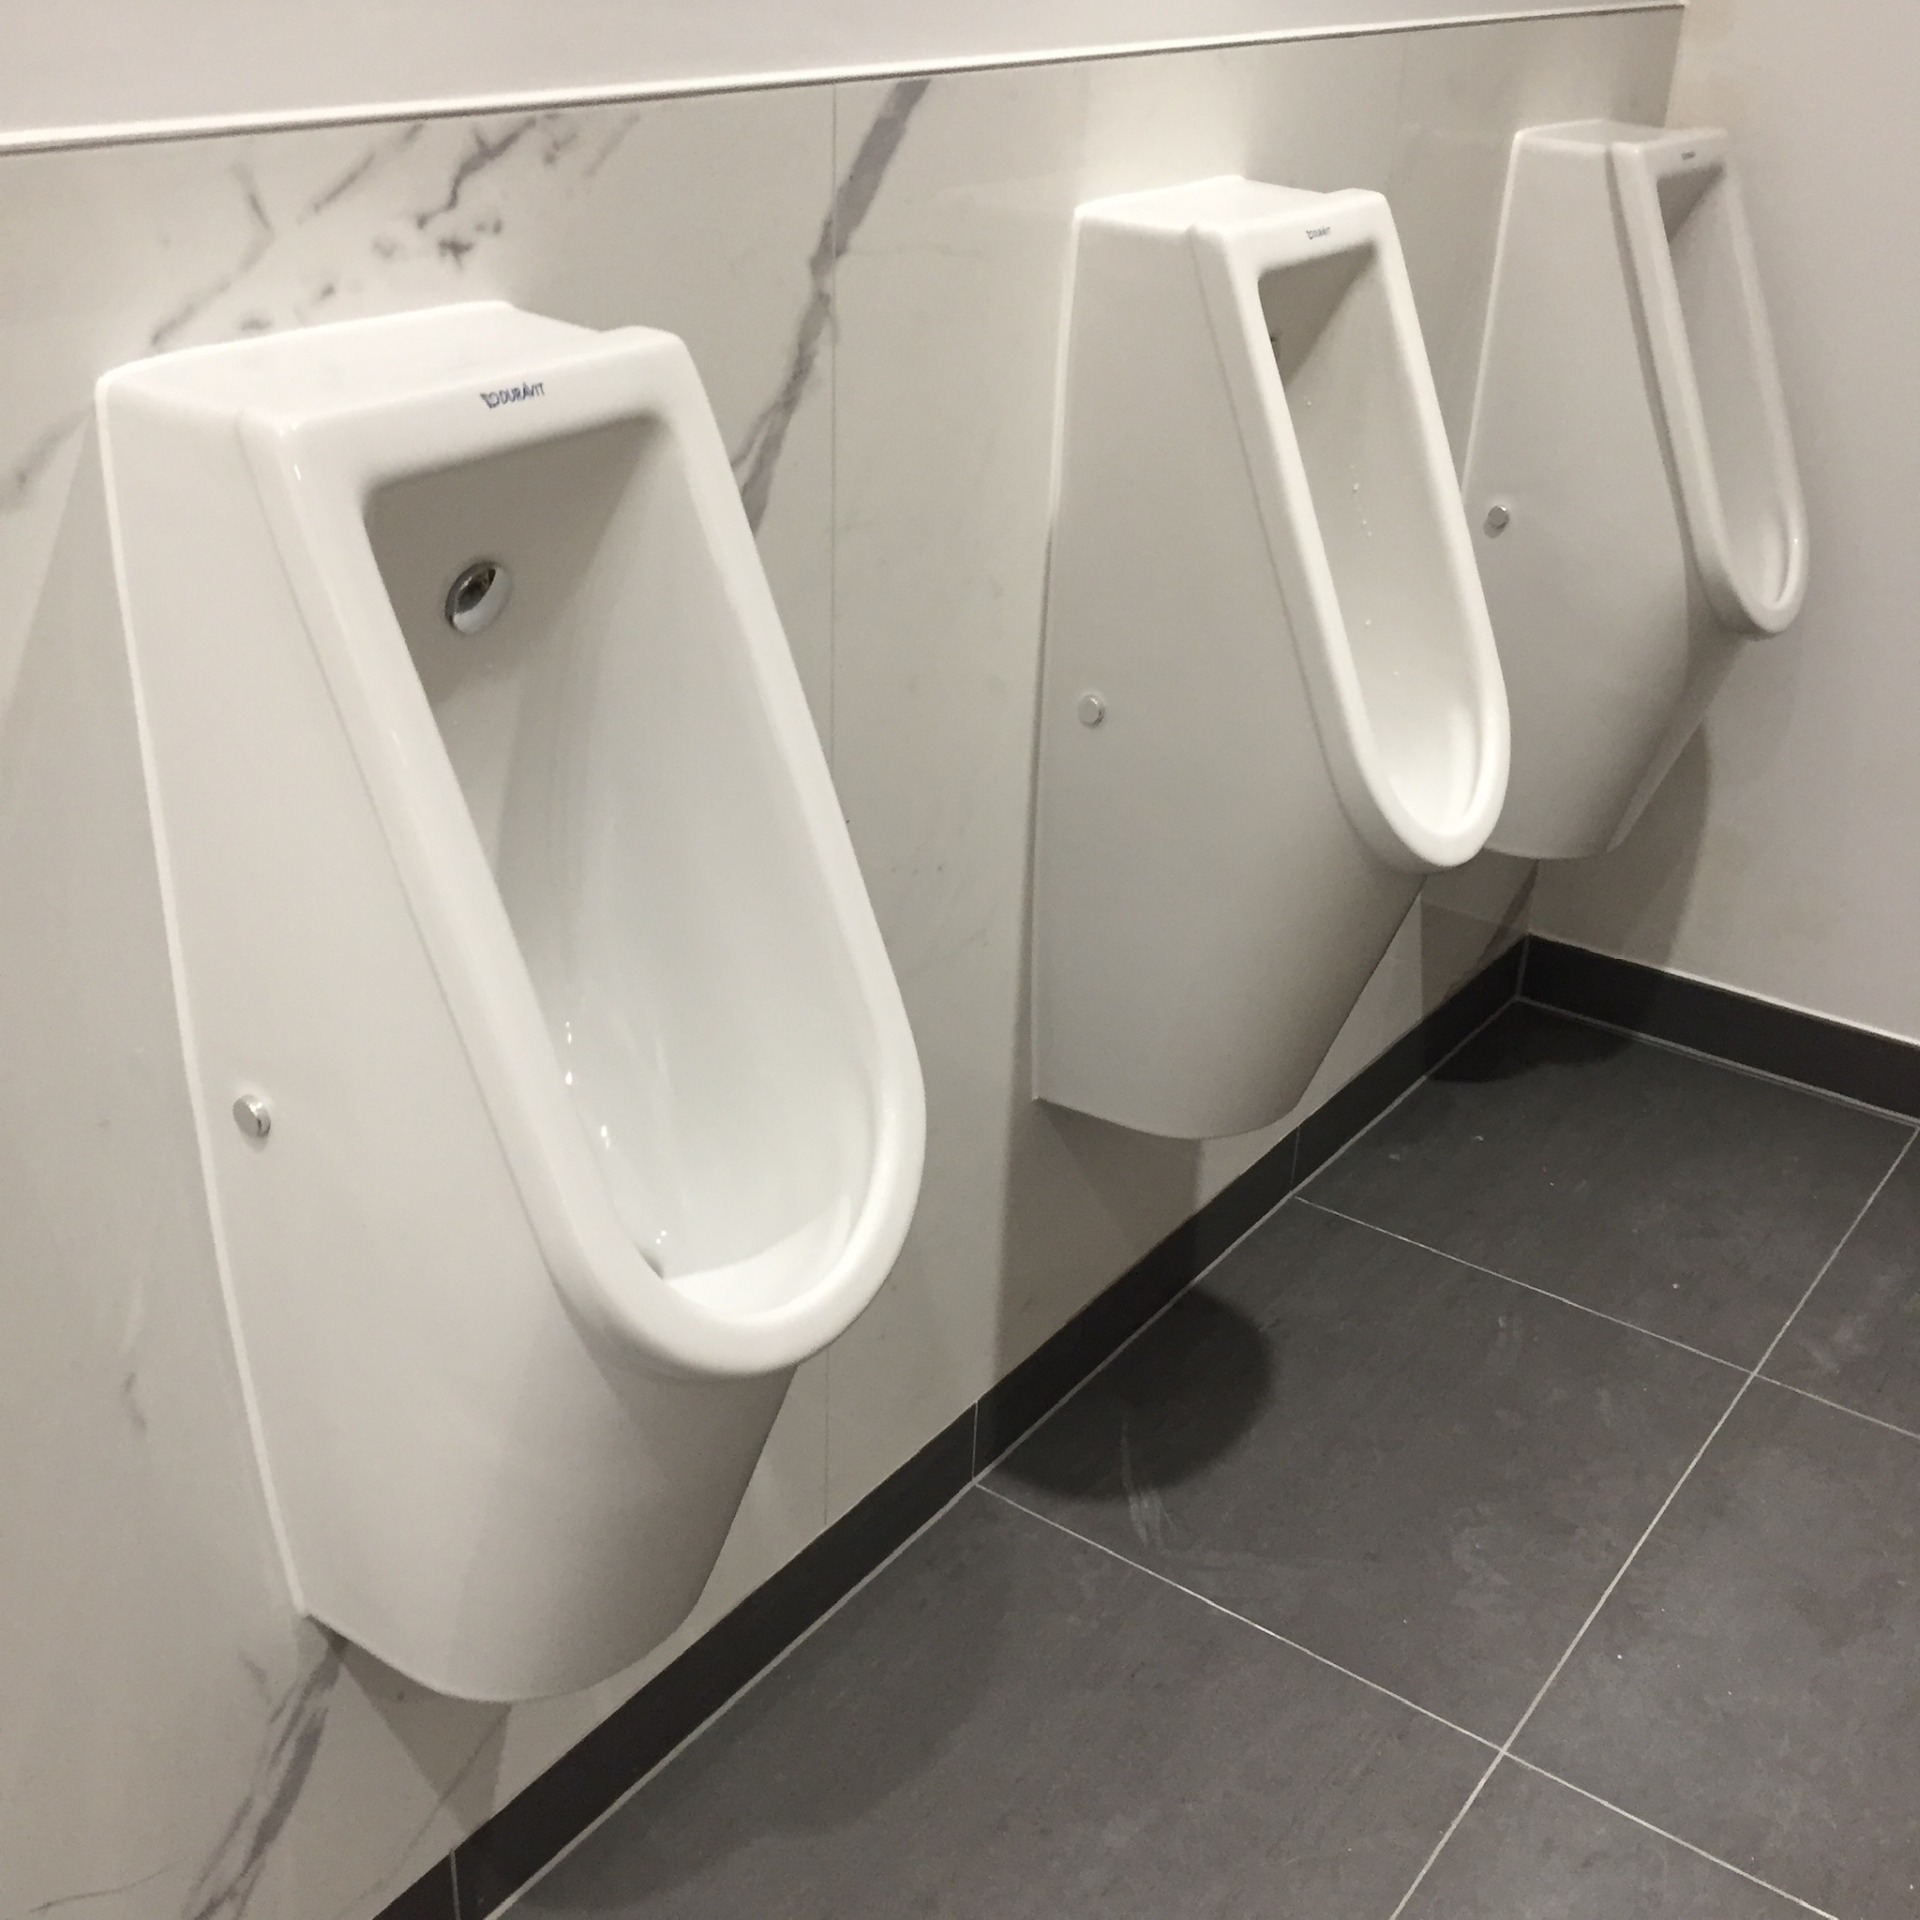 three urinals with a white mastic applied